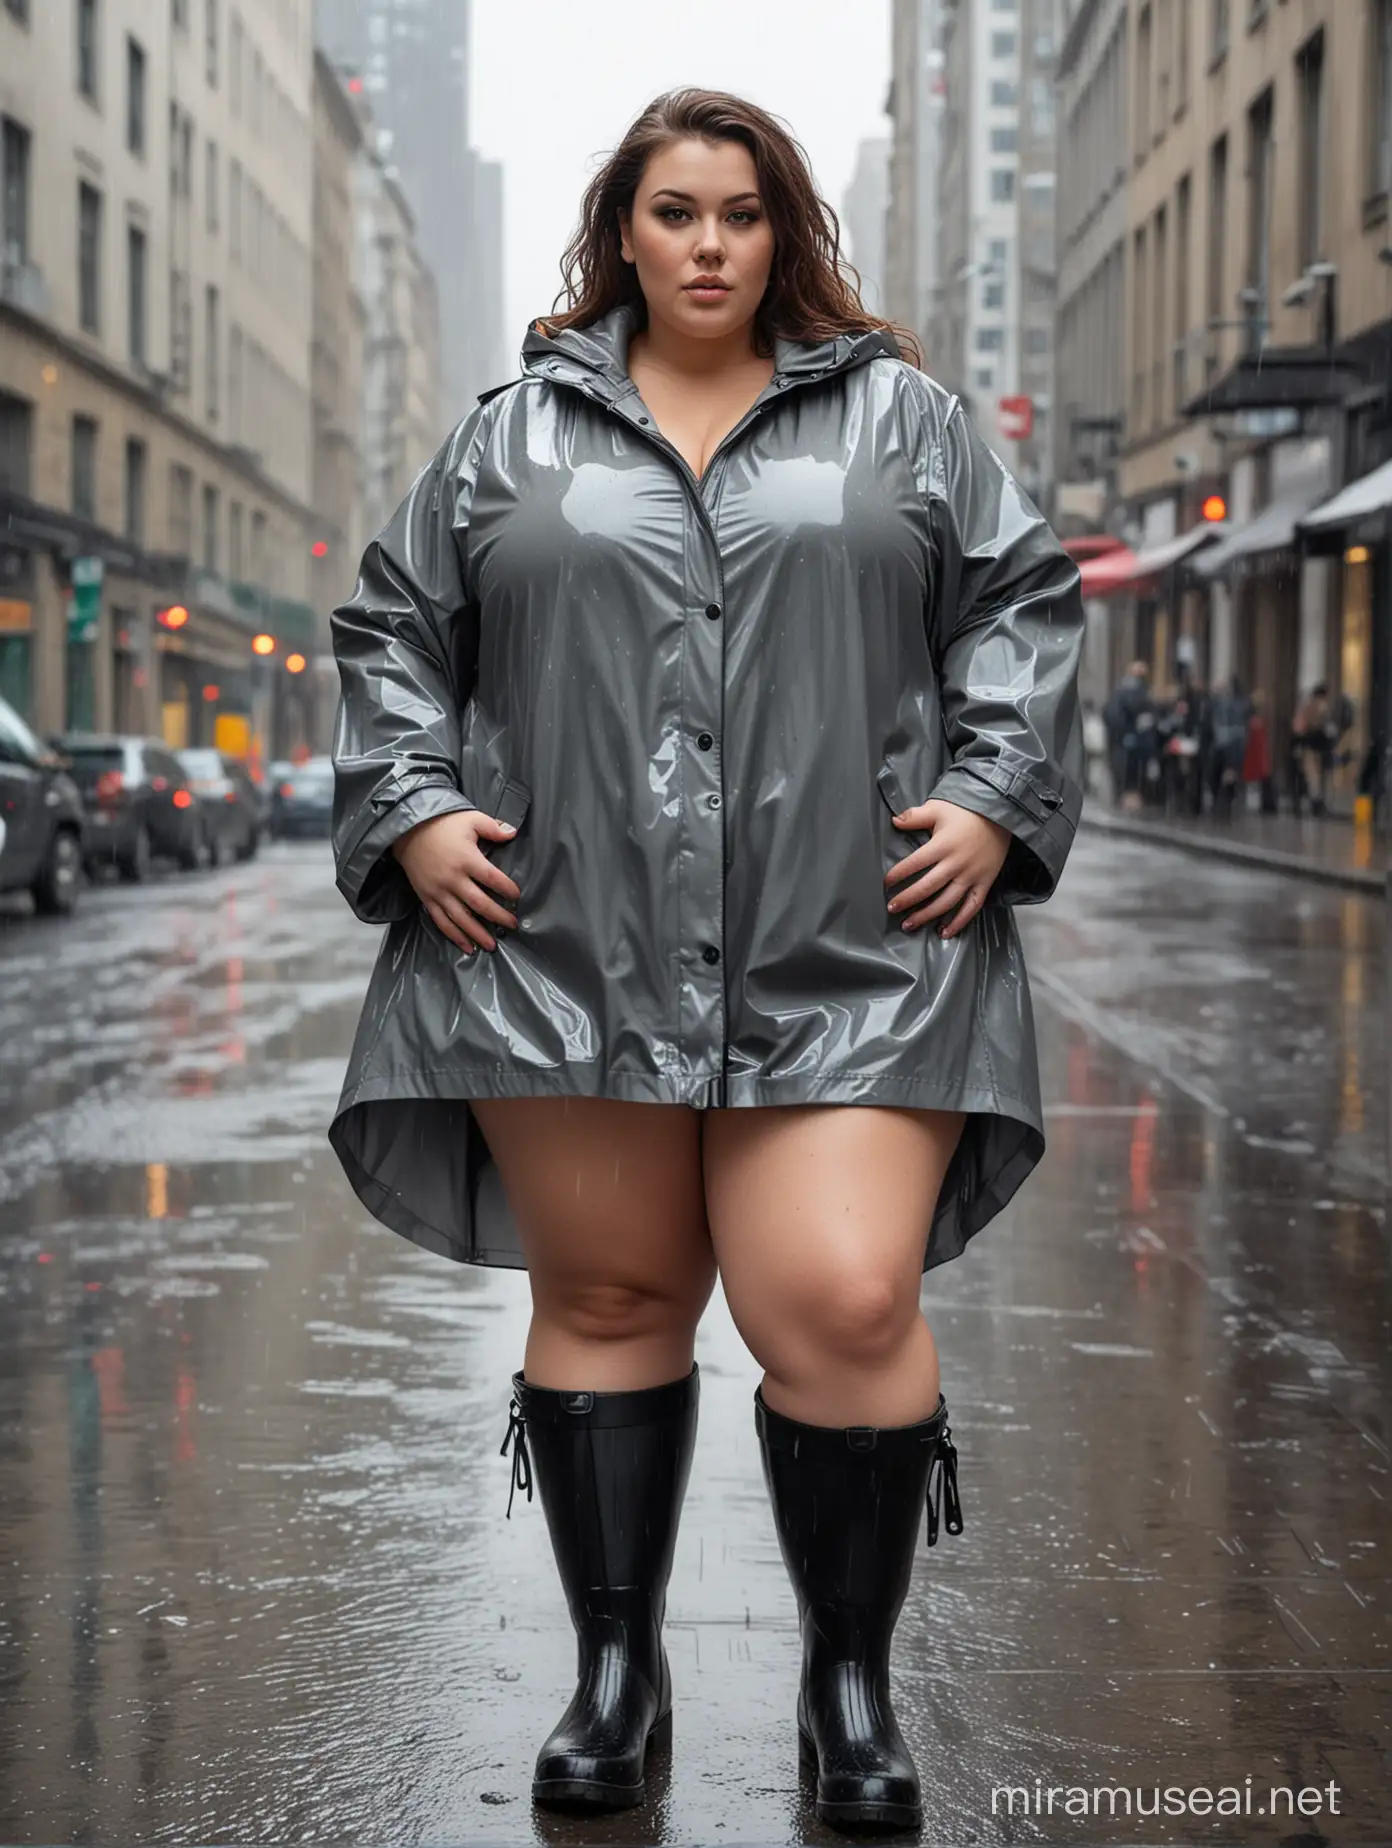 Urban Rainy Day PlusSize Woman in Raincoat and Rubber Boots